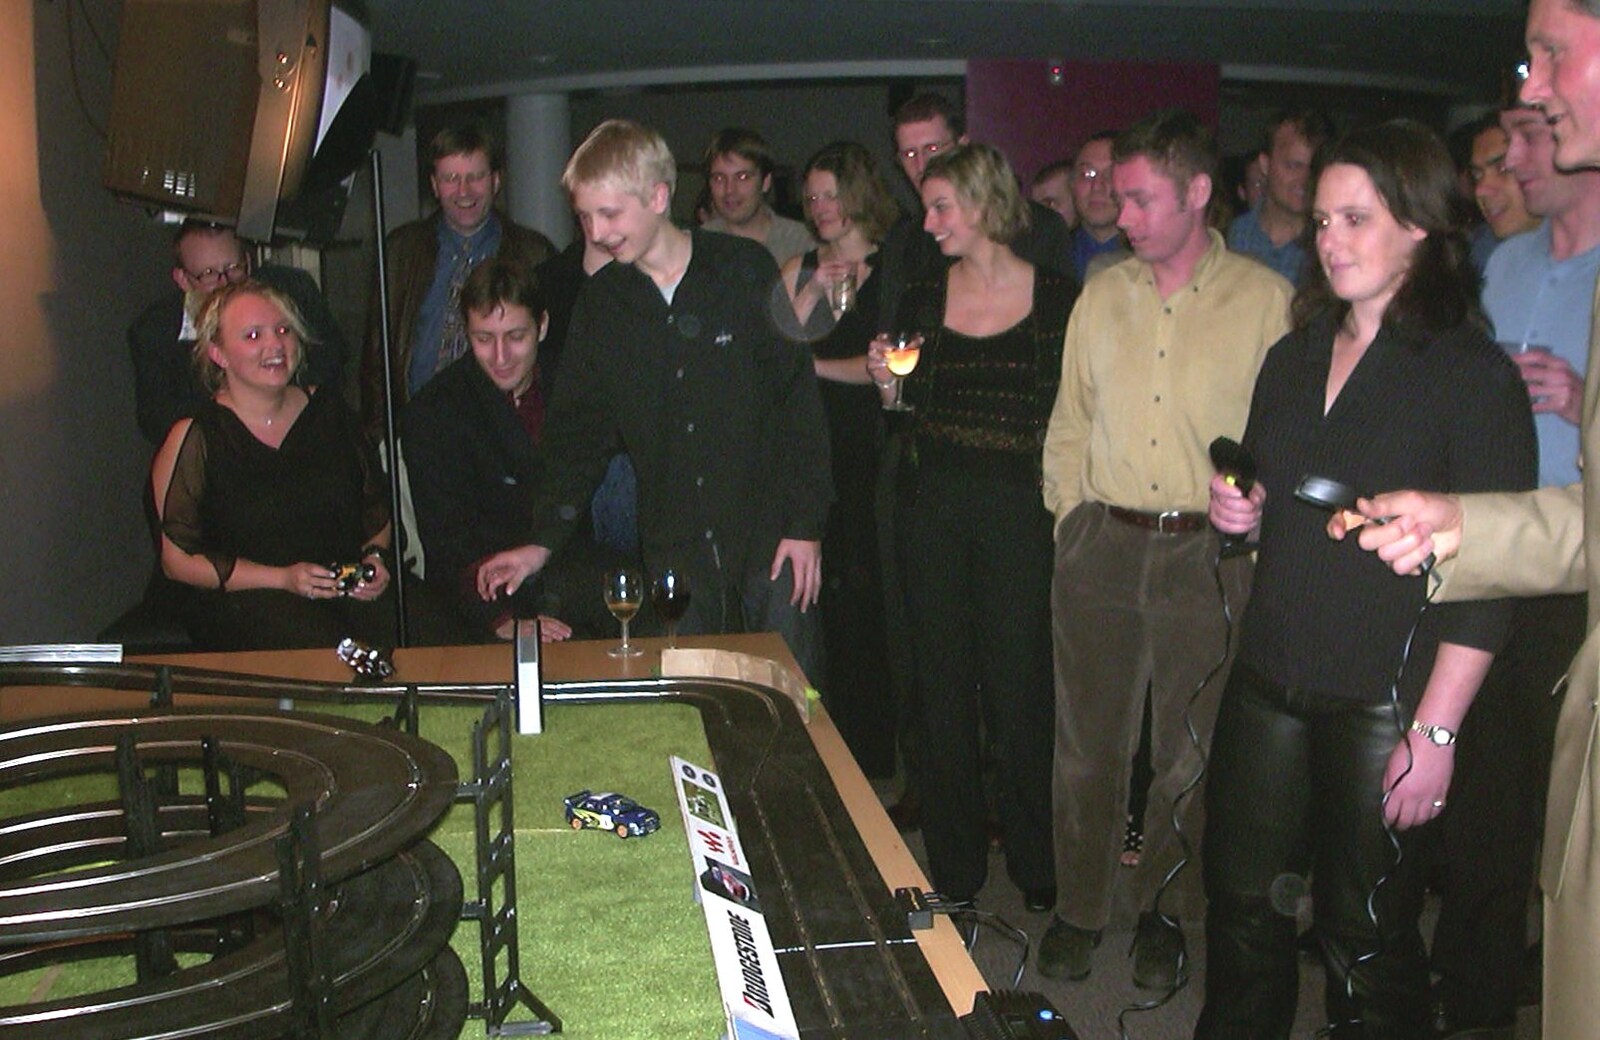 There's a Scalextric set up from 3G Lab Christmas Party, Q-Ton Centre, Cambridge - 20th December 2001